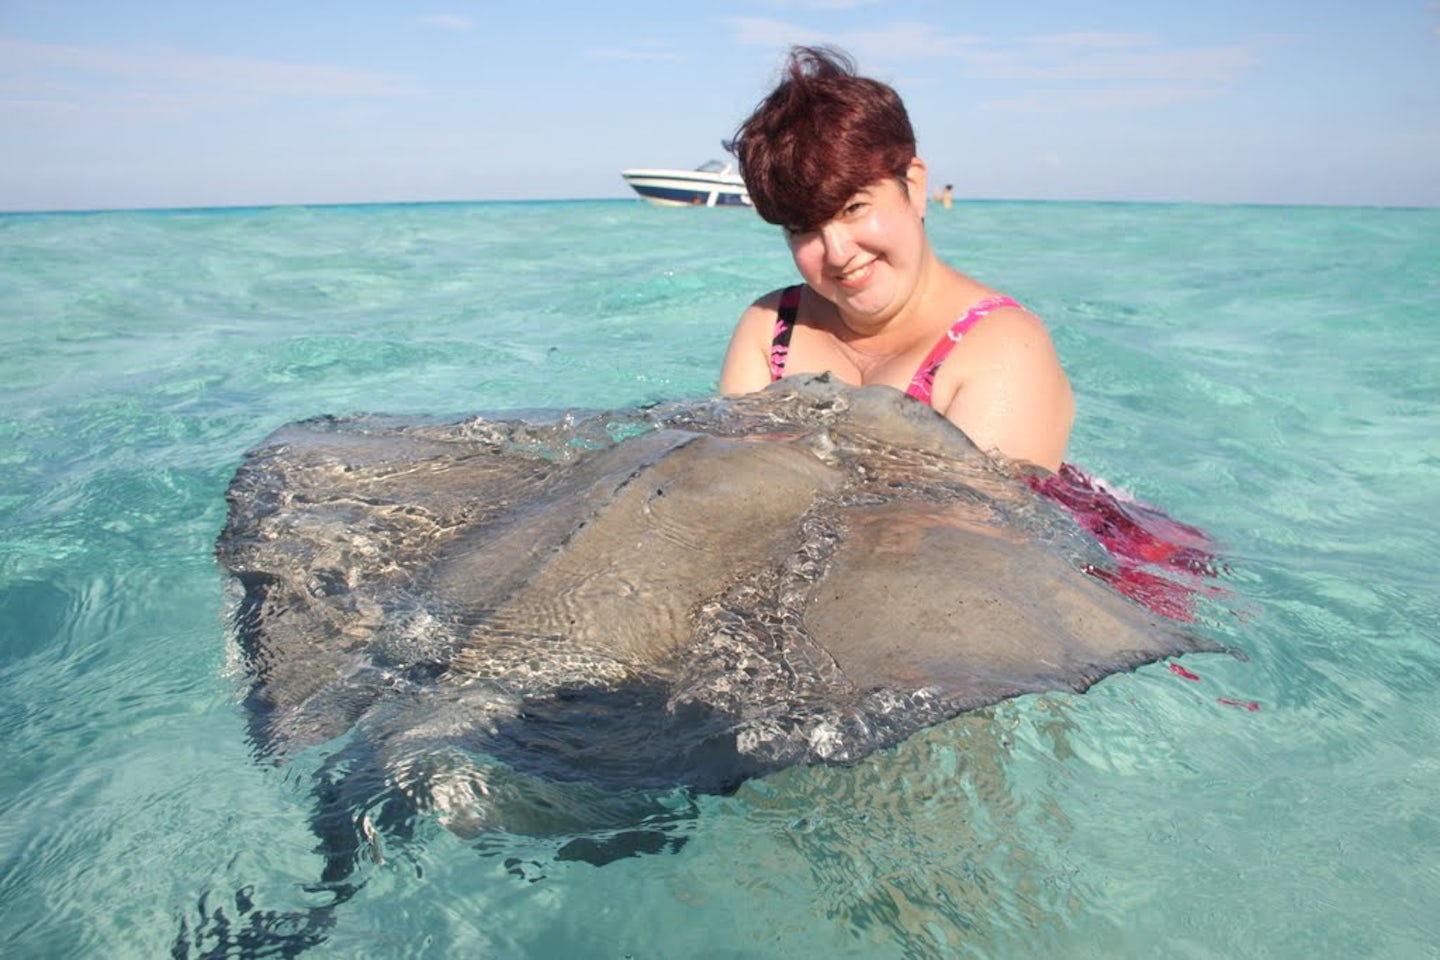 meeting a sting ray named Michelle